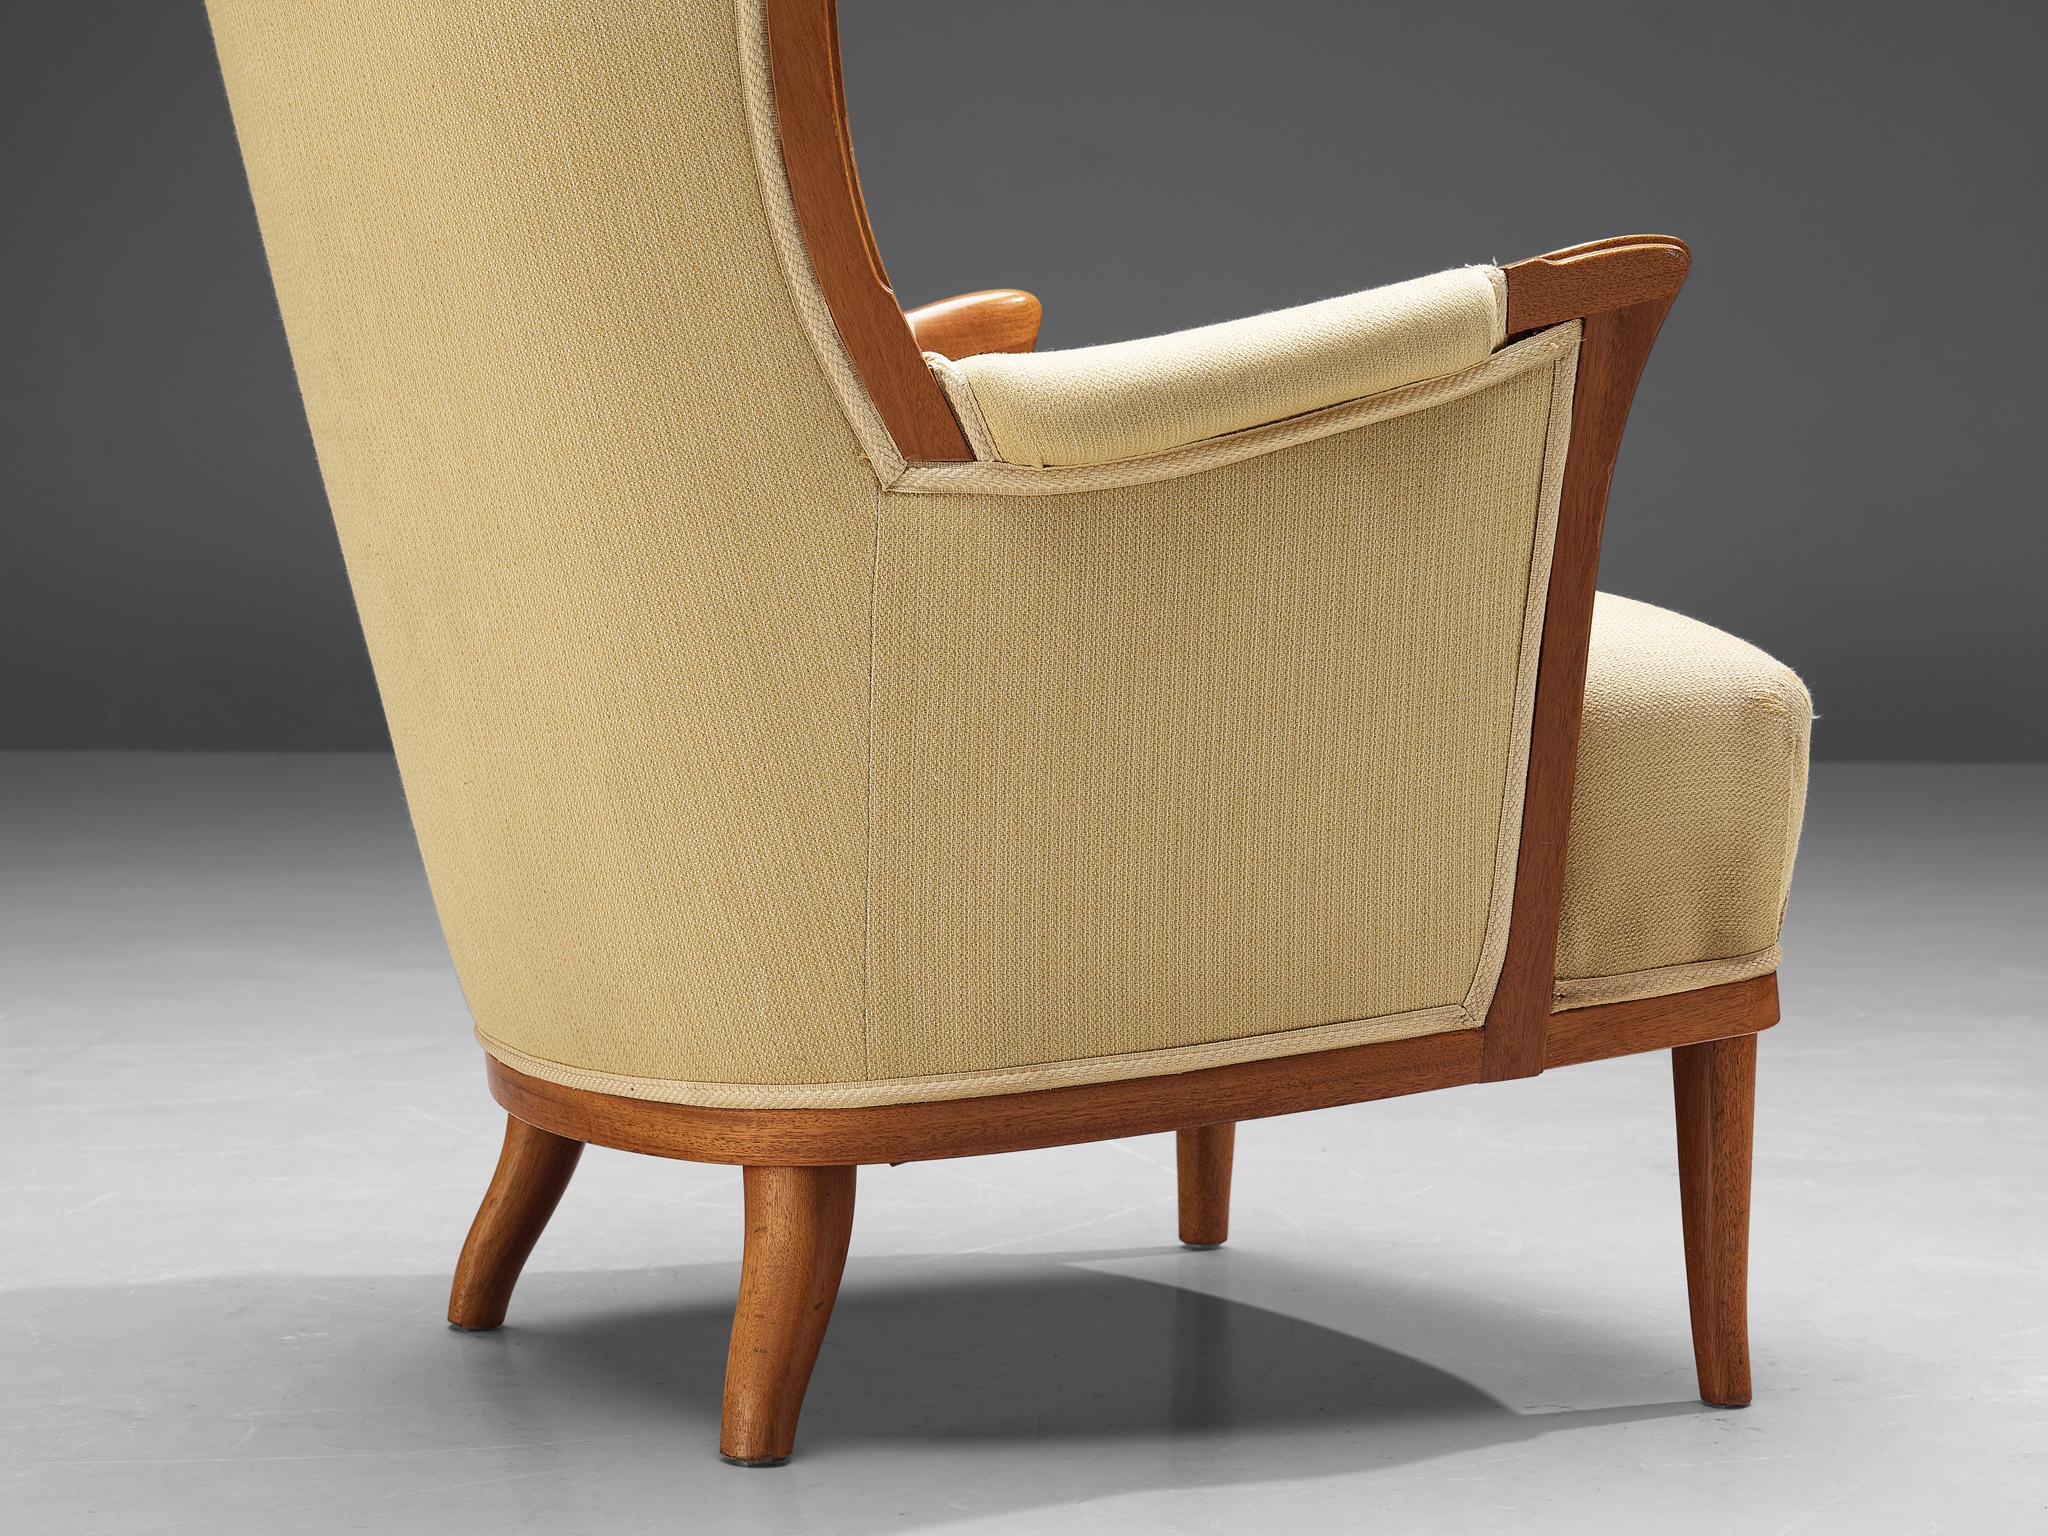 Mid-20th Century Carl Malmsten for O.H. Sjögren 'Our Lady' Lounge Chair in Teak For Sale